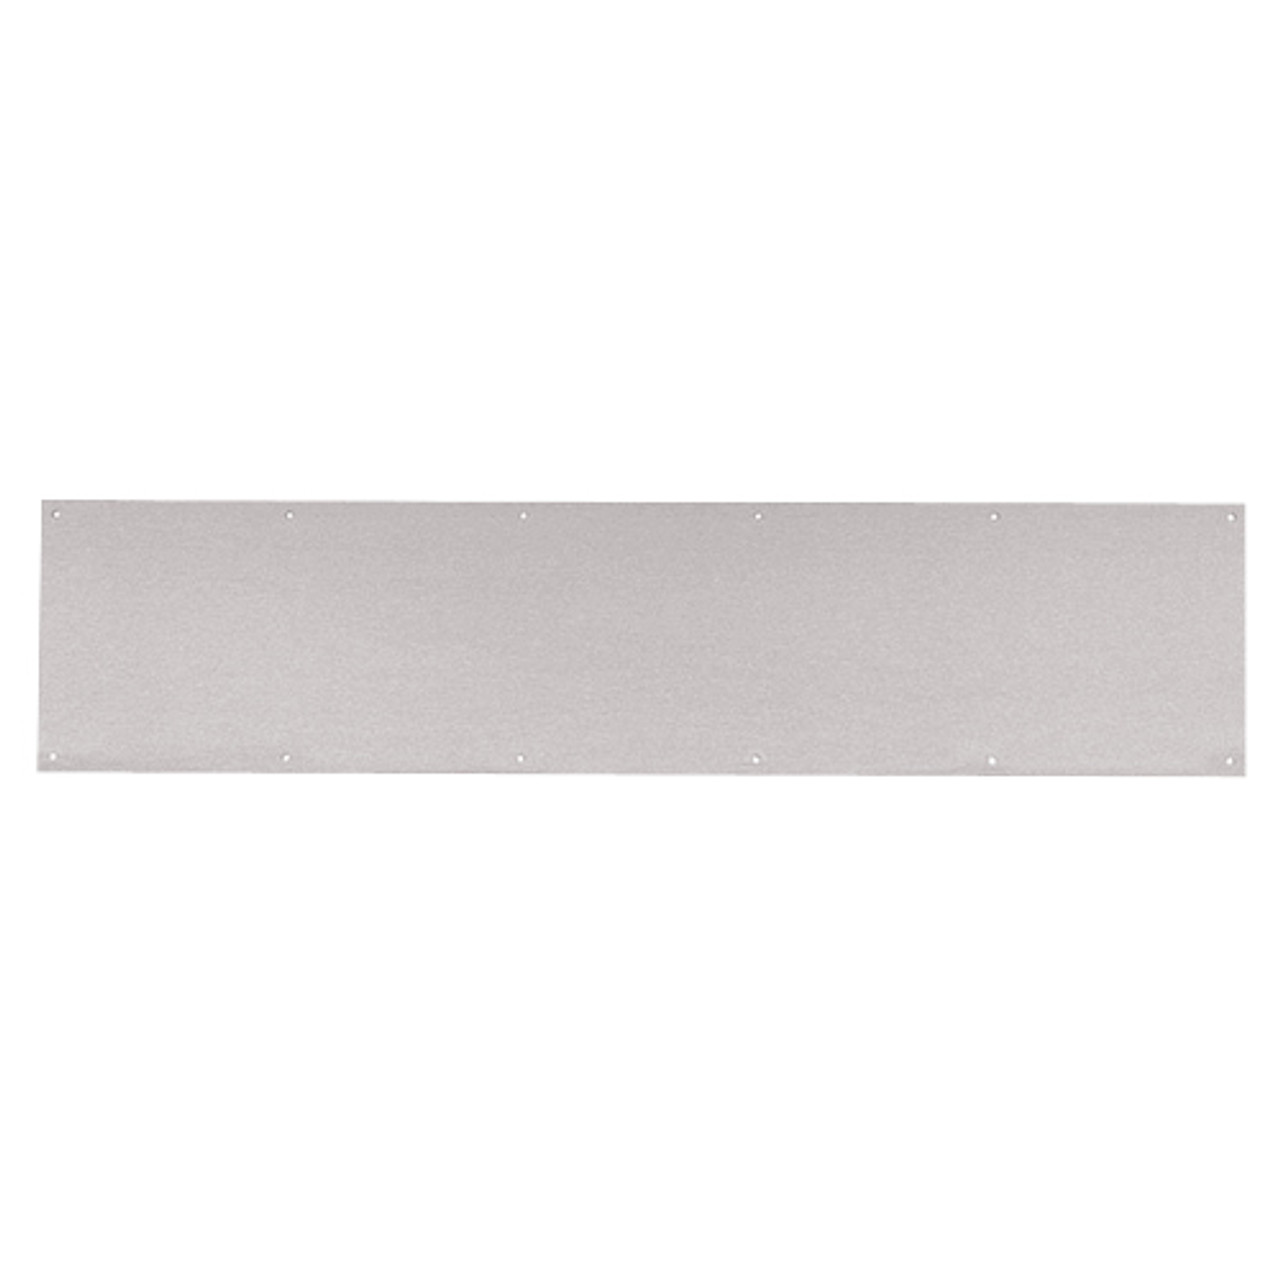 8400-US32D-11x36-B-CS Ives 8400 Series Protection Plate in Satin Stainless Steel